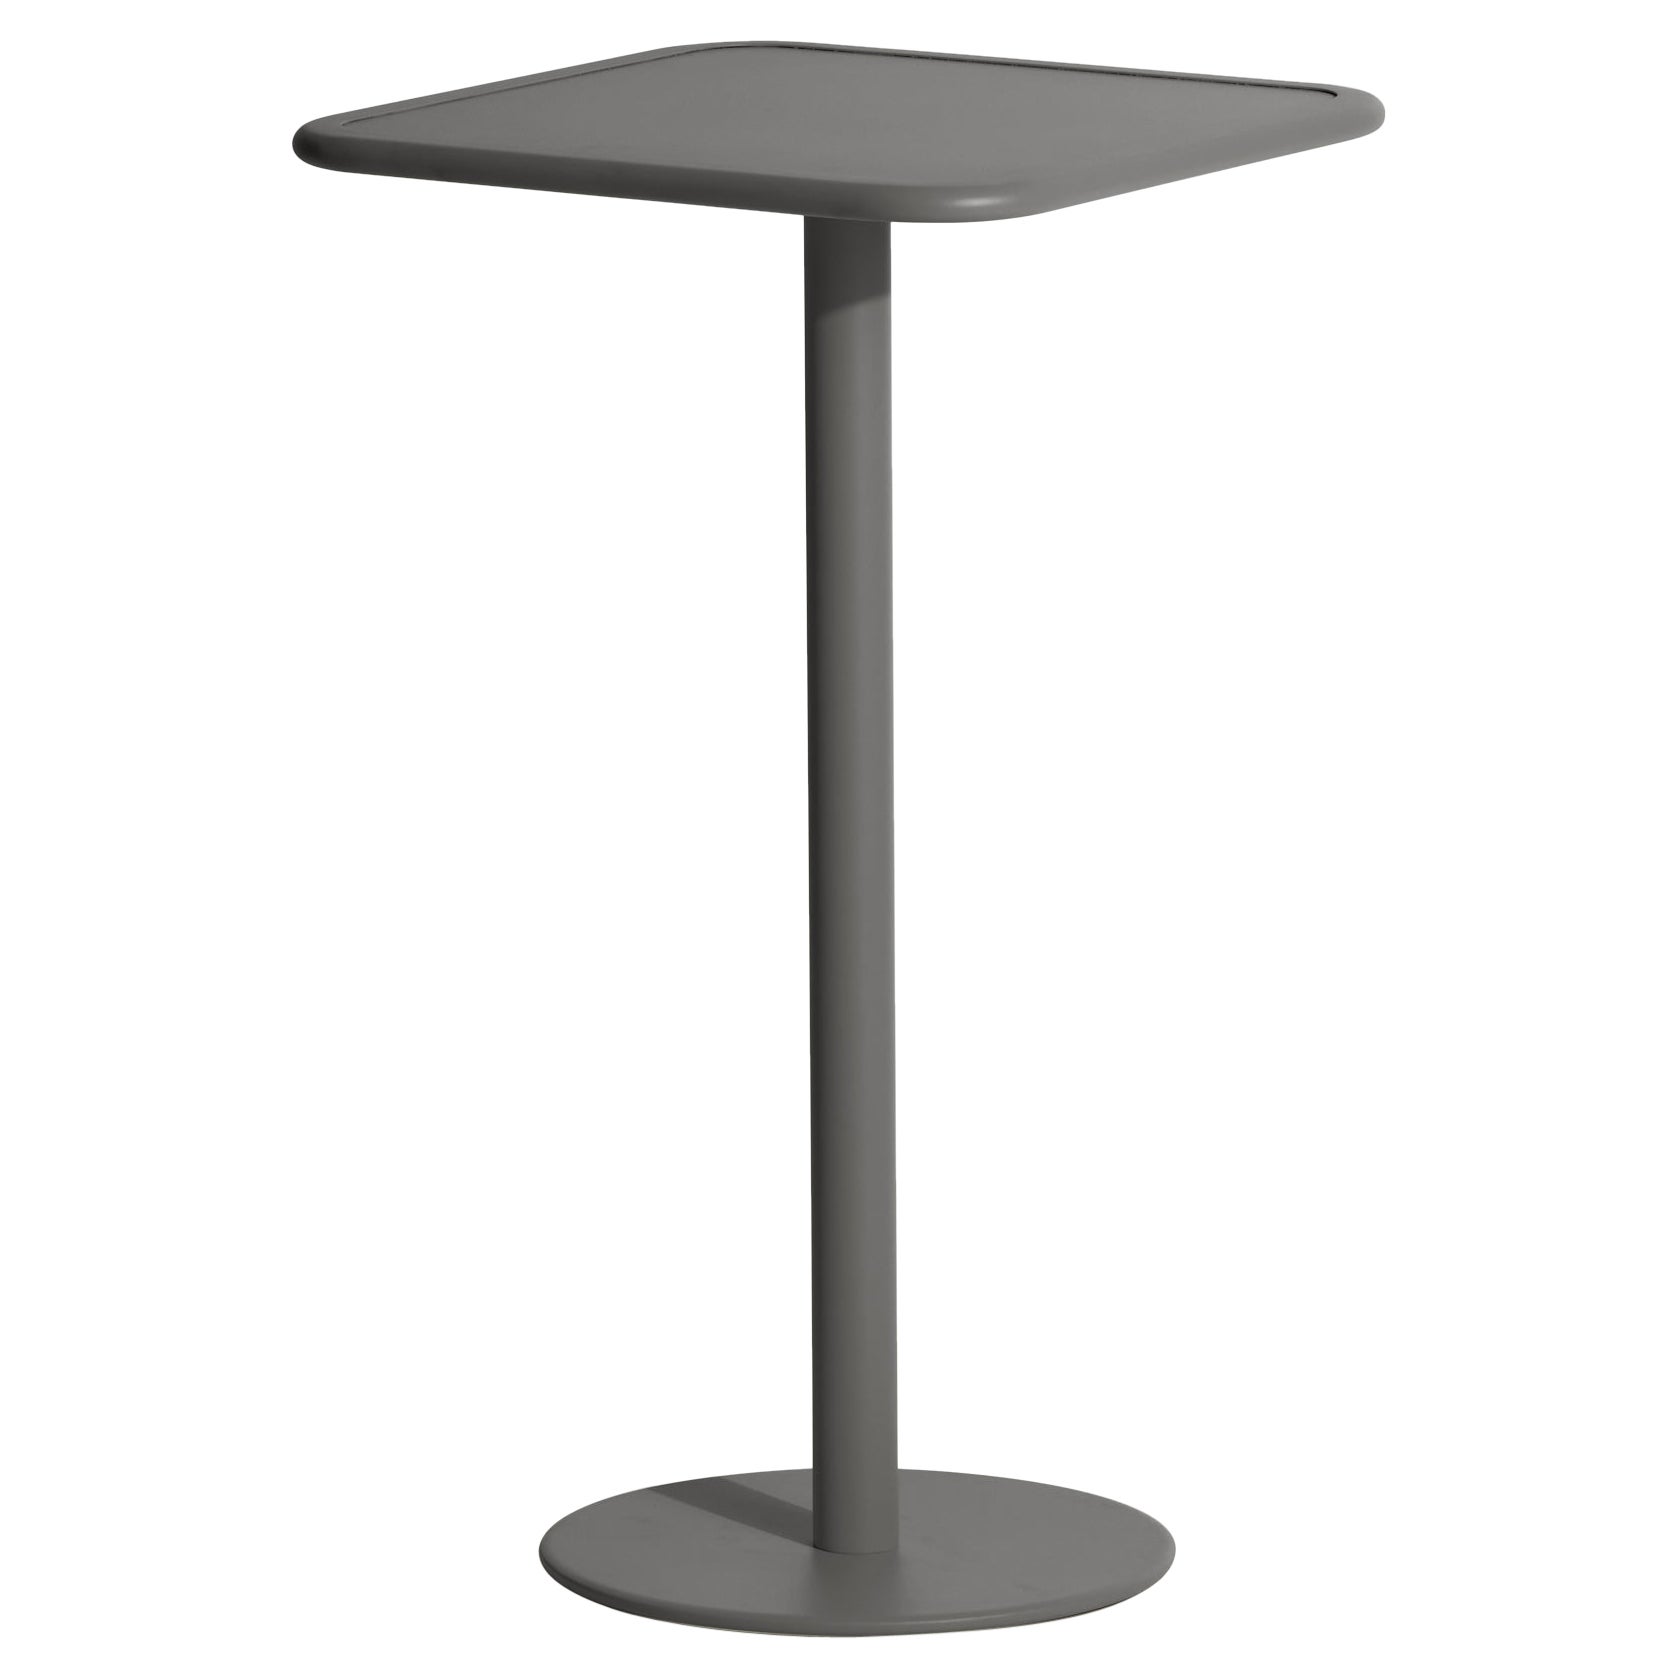 Petite Friture Week-End Square High Table in Anthracite Aluminium, 2017 For Sale